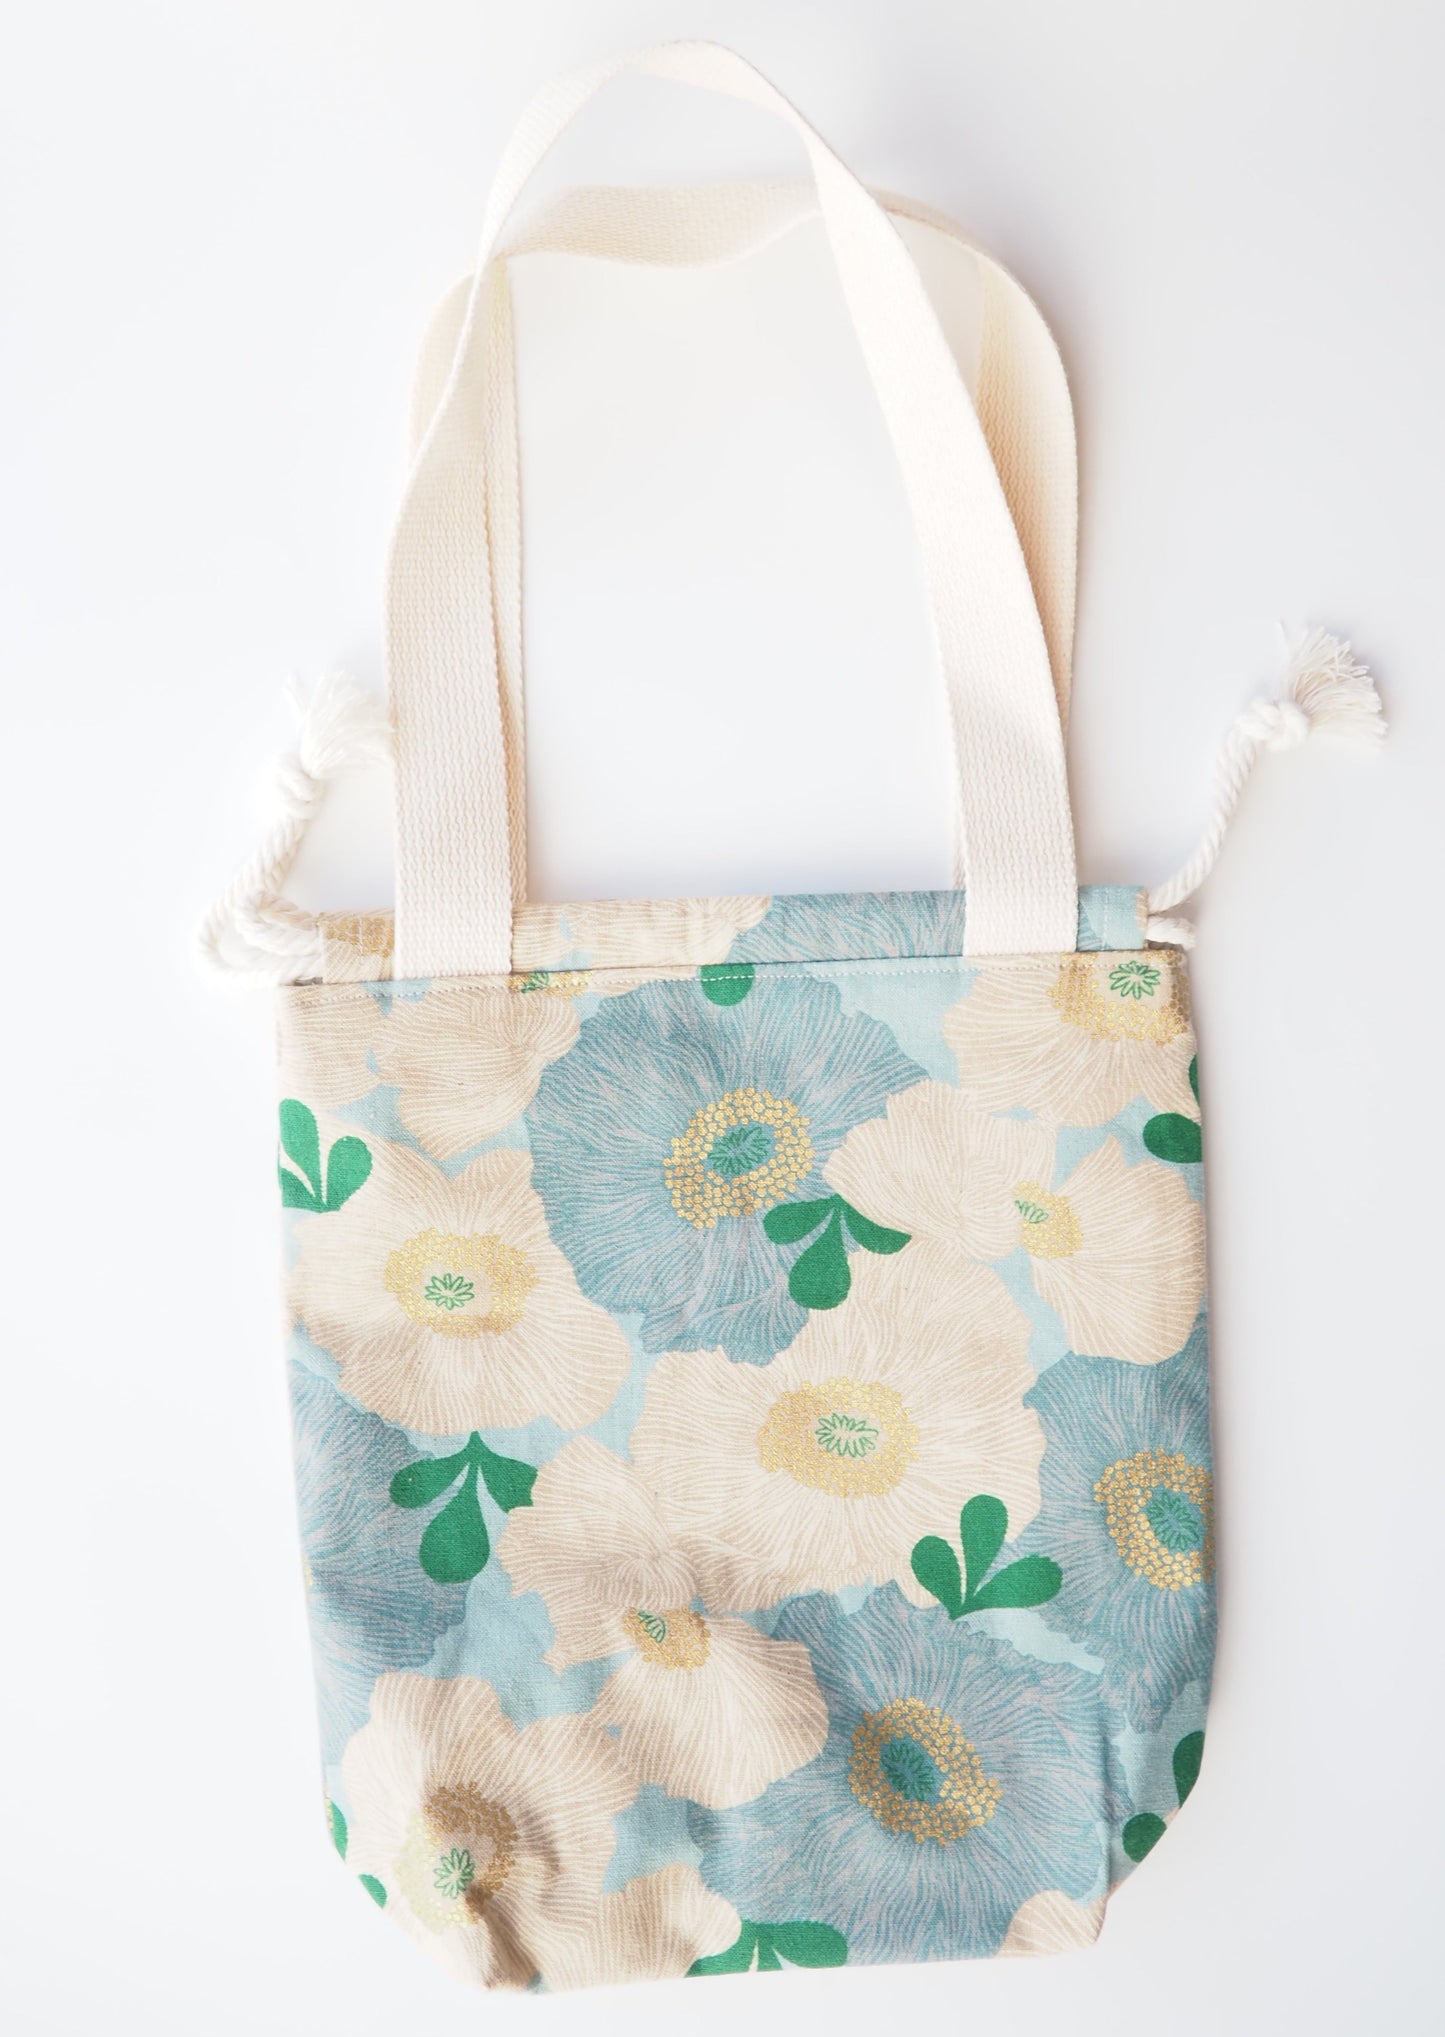 handmade.eo: Small Project Bag with Handles & Drawstring